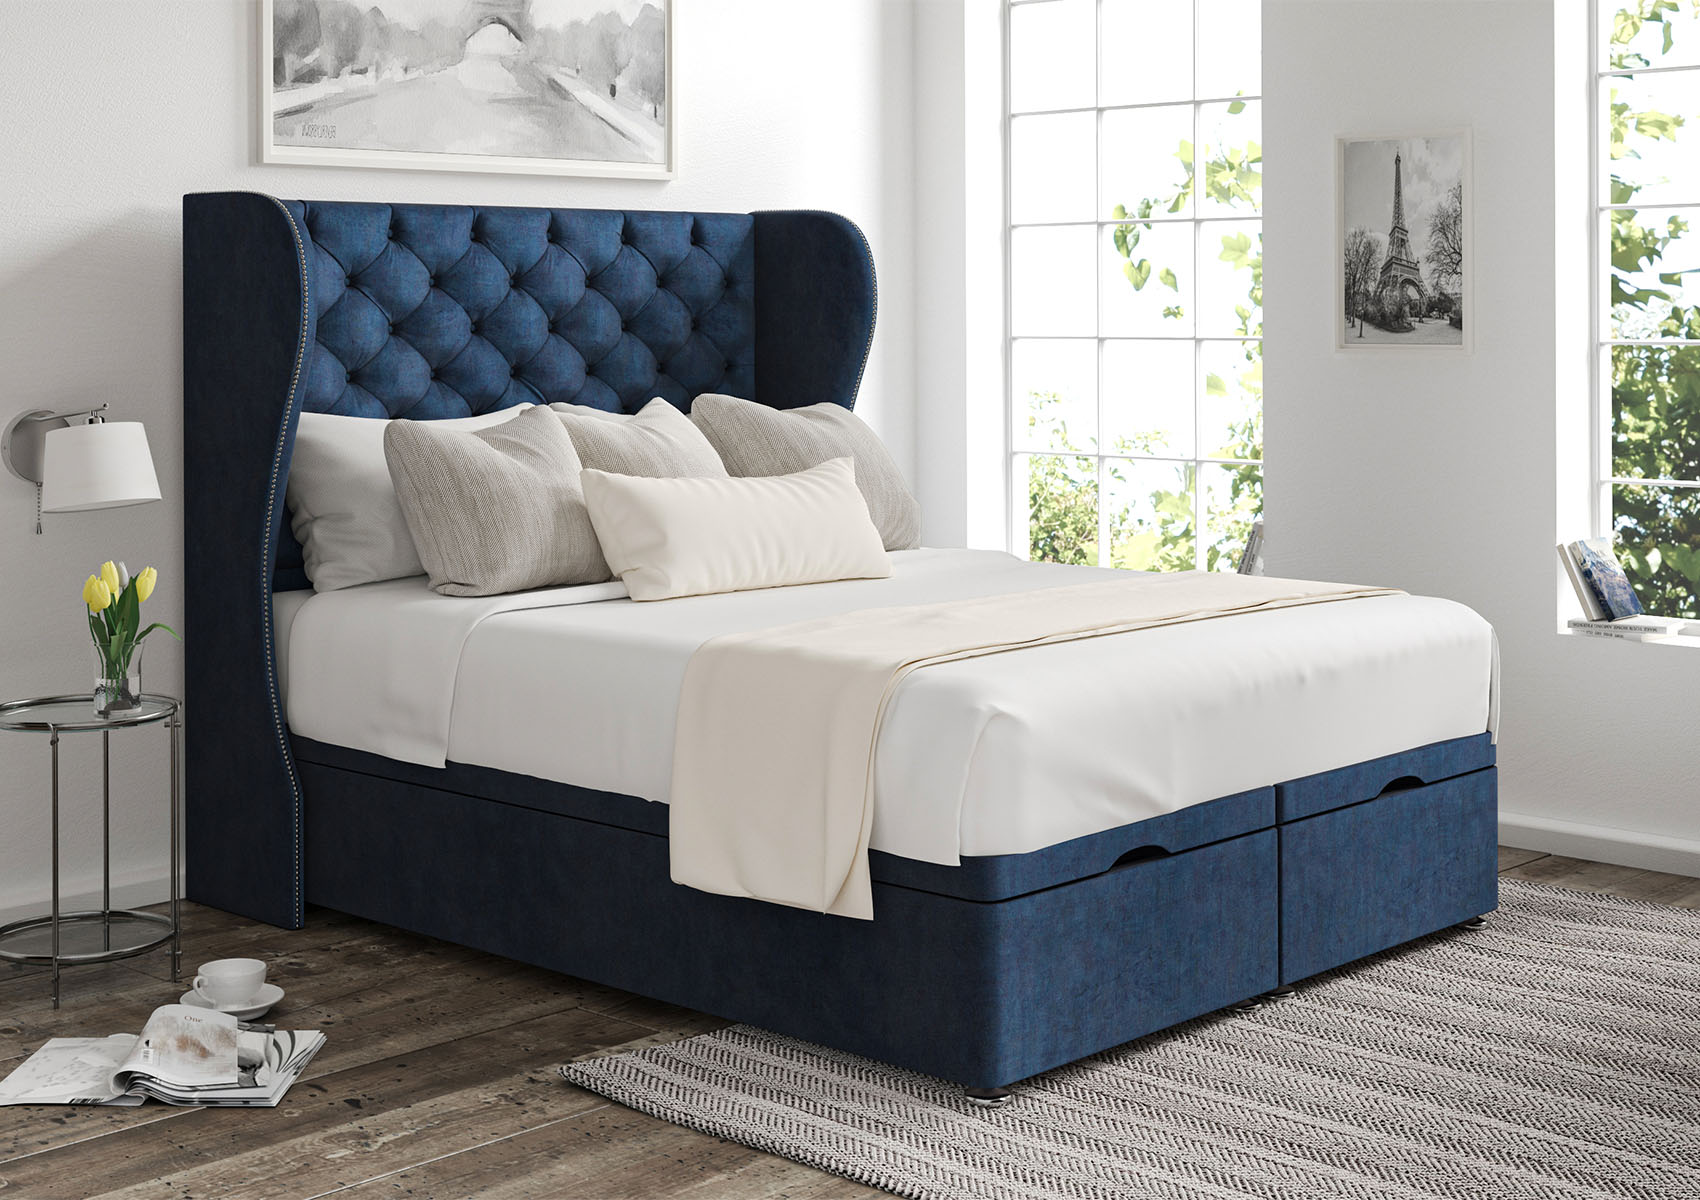 View Miami Heritage Royal Upholstered Single Ottoman Bed Time4Sleep information